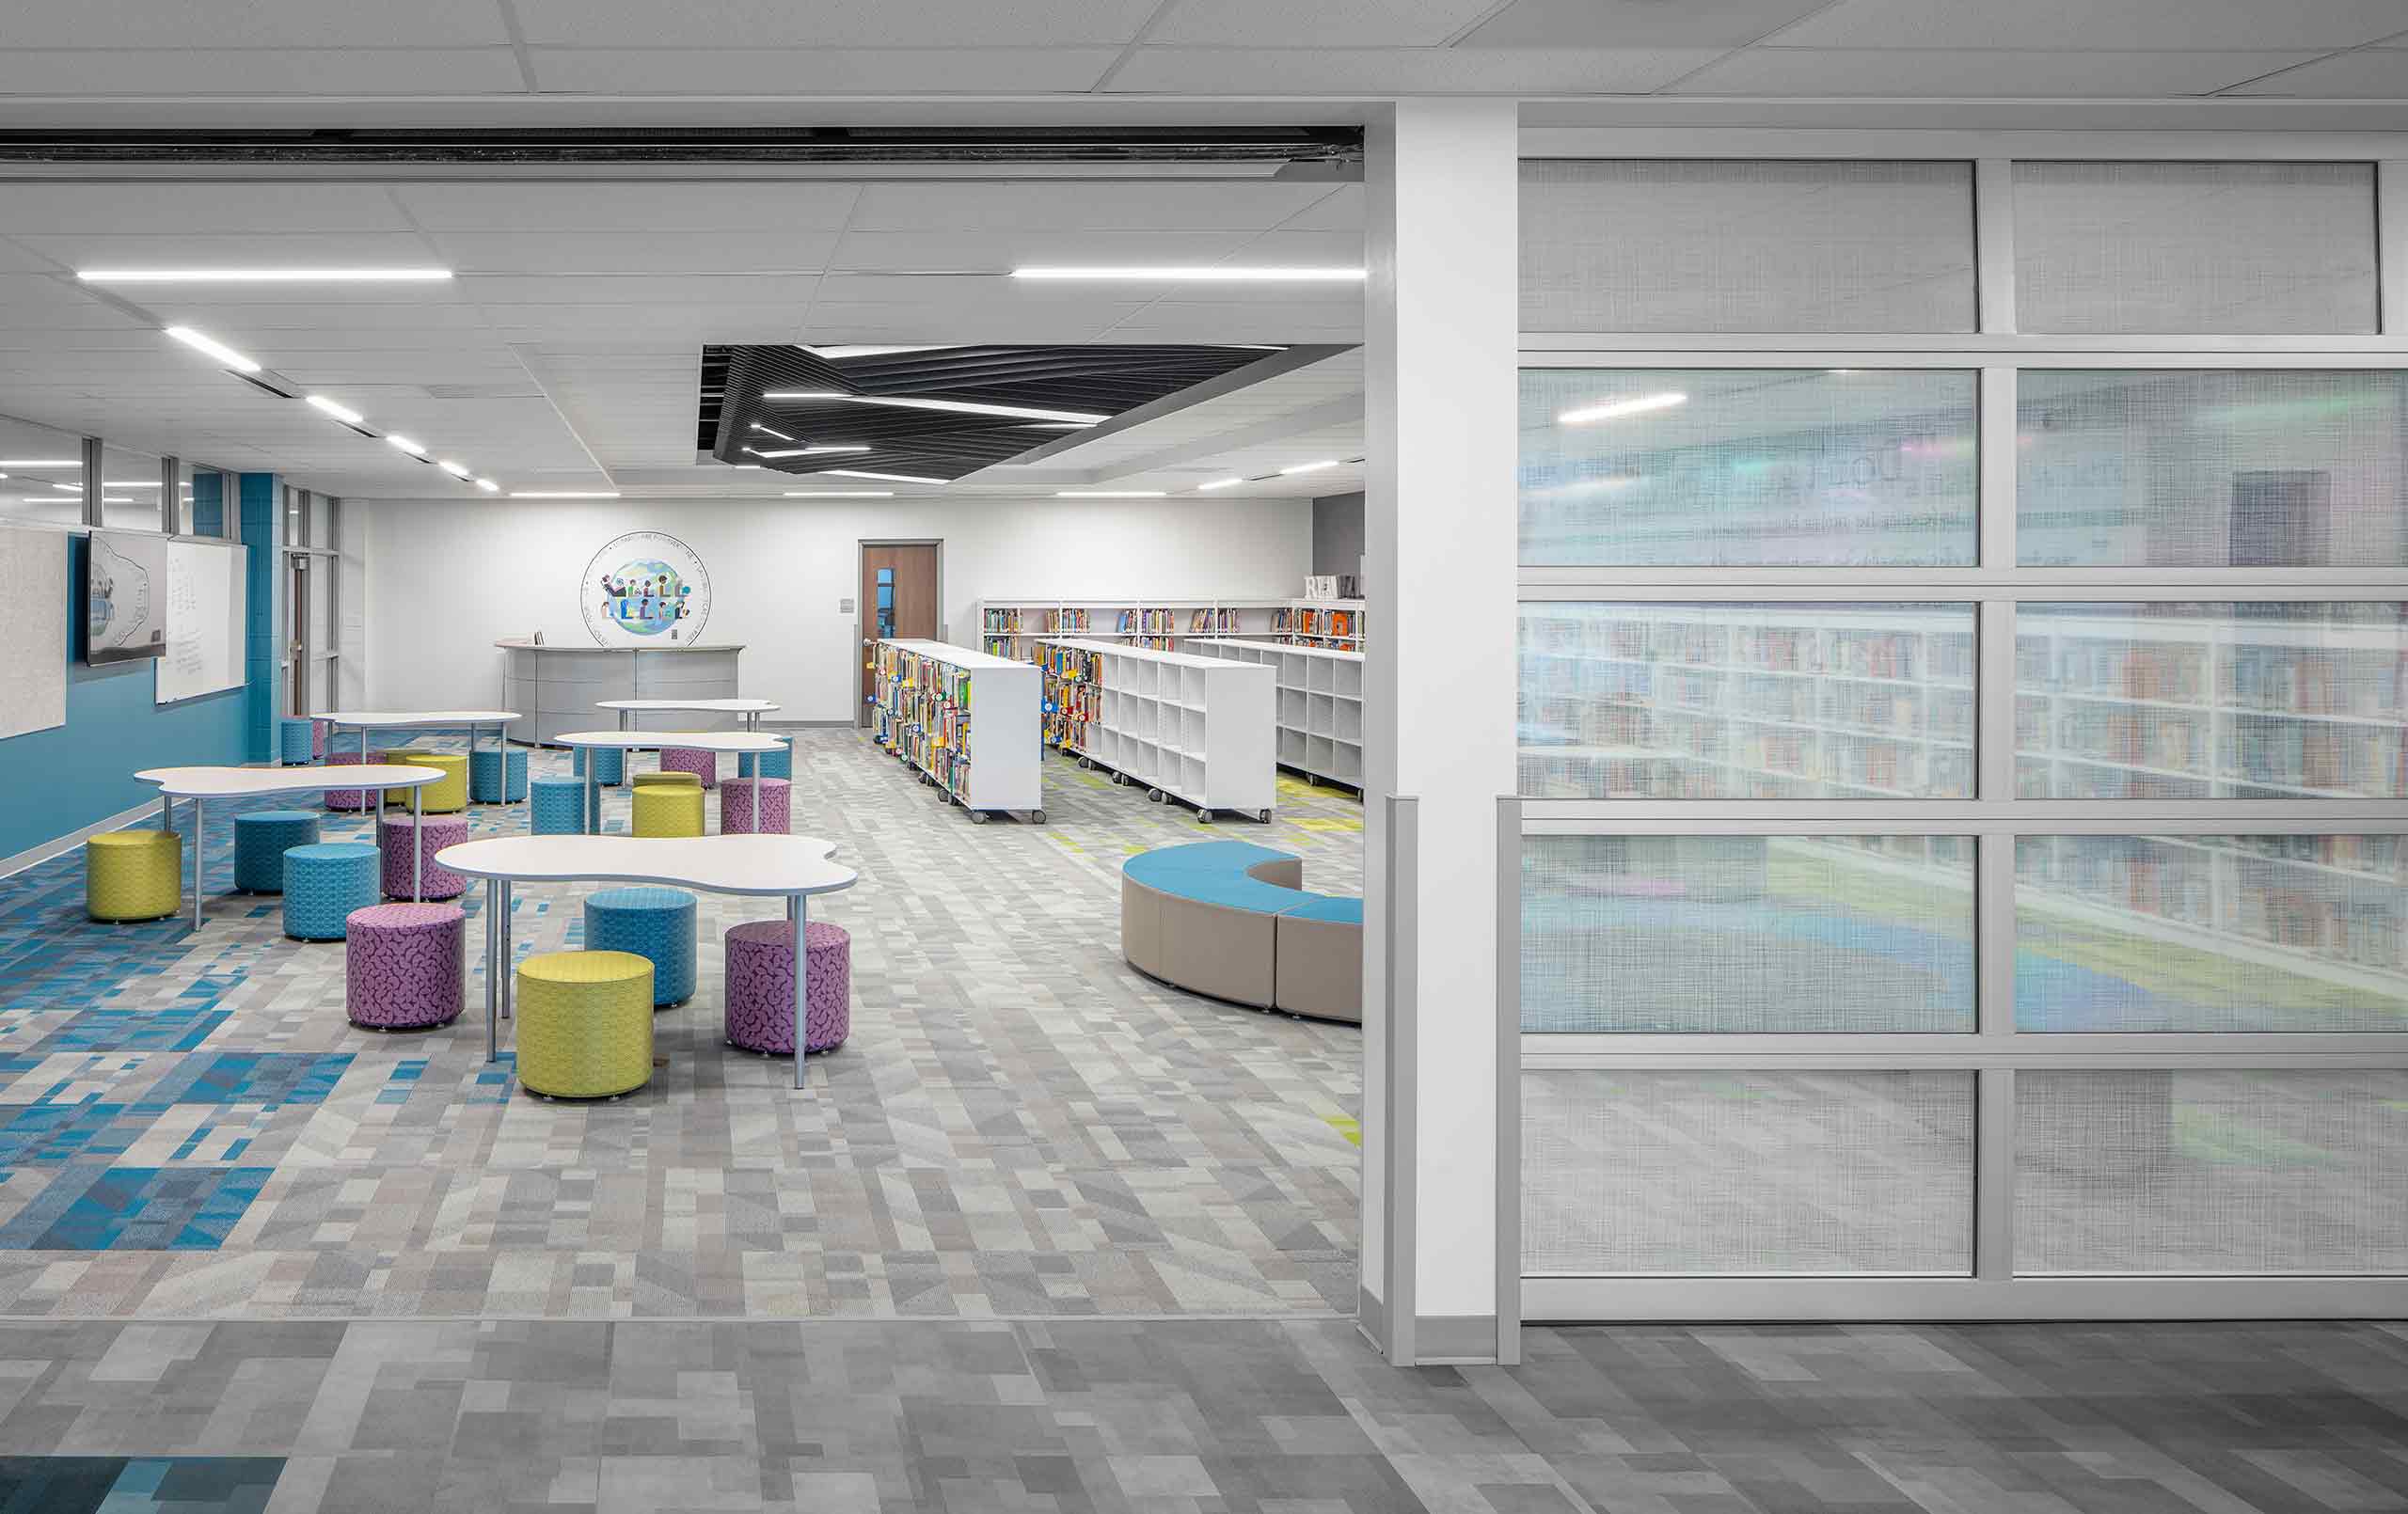 Galesburg King Elementary School library with seating, tables, and bookshelves